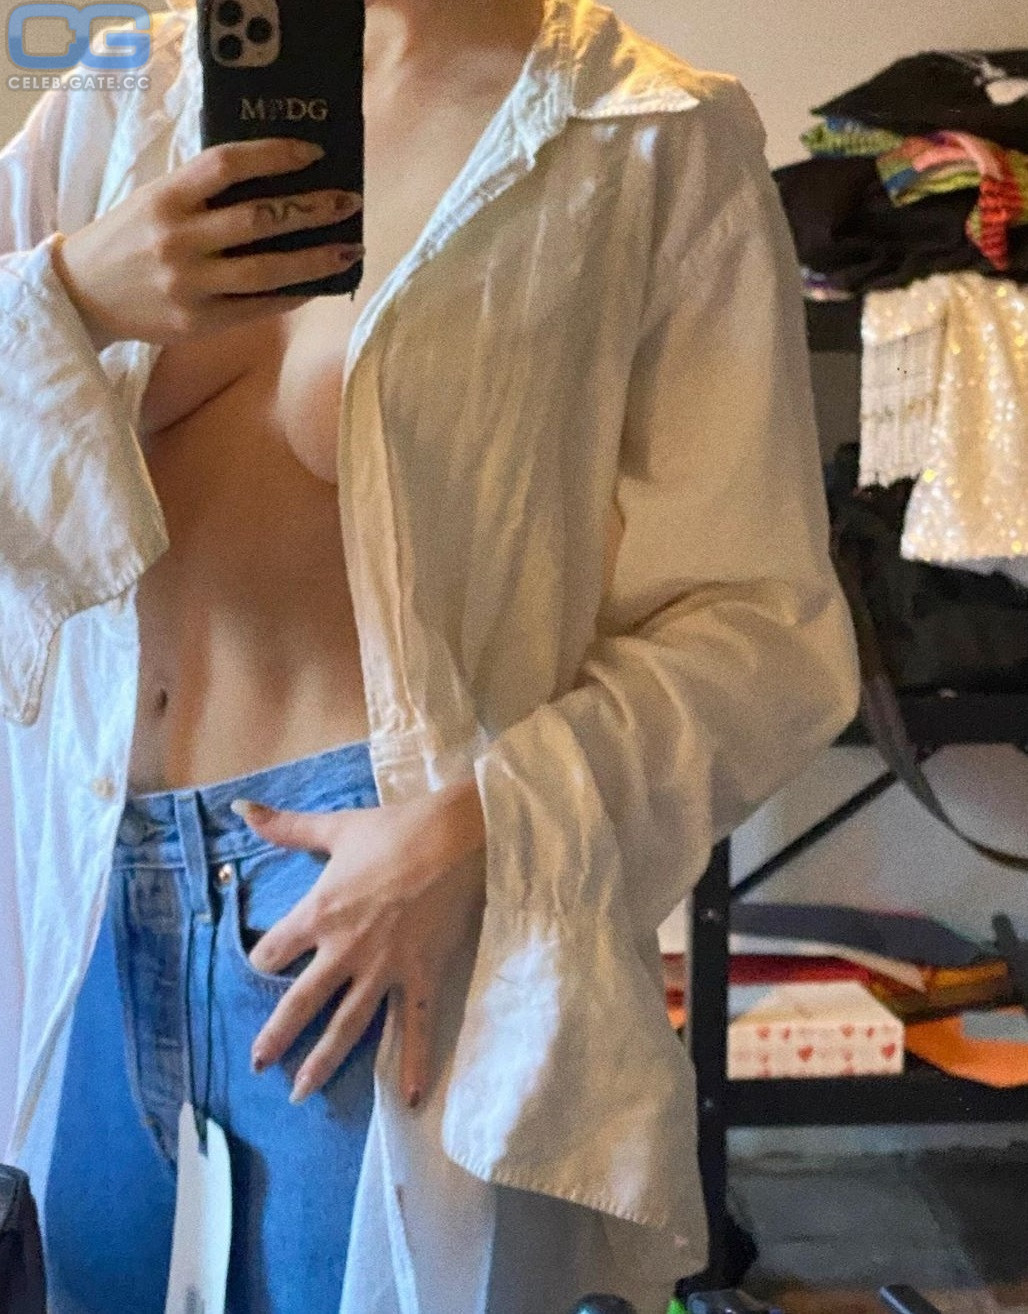 Nude pictures of dove cameron